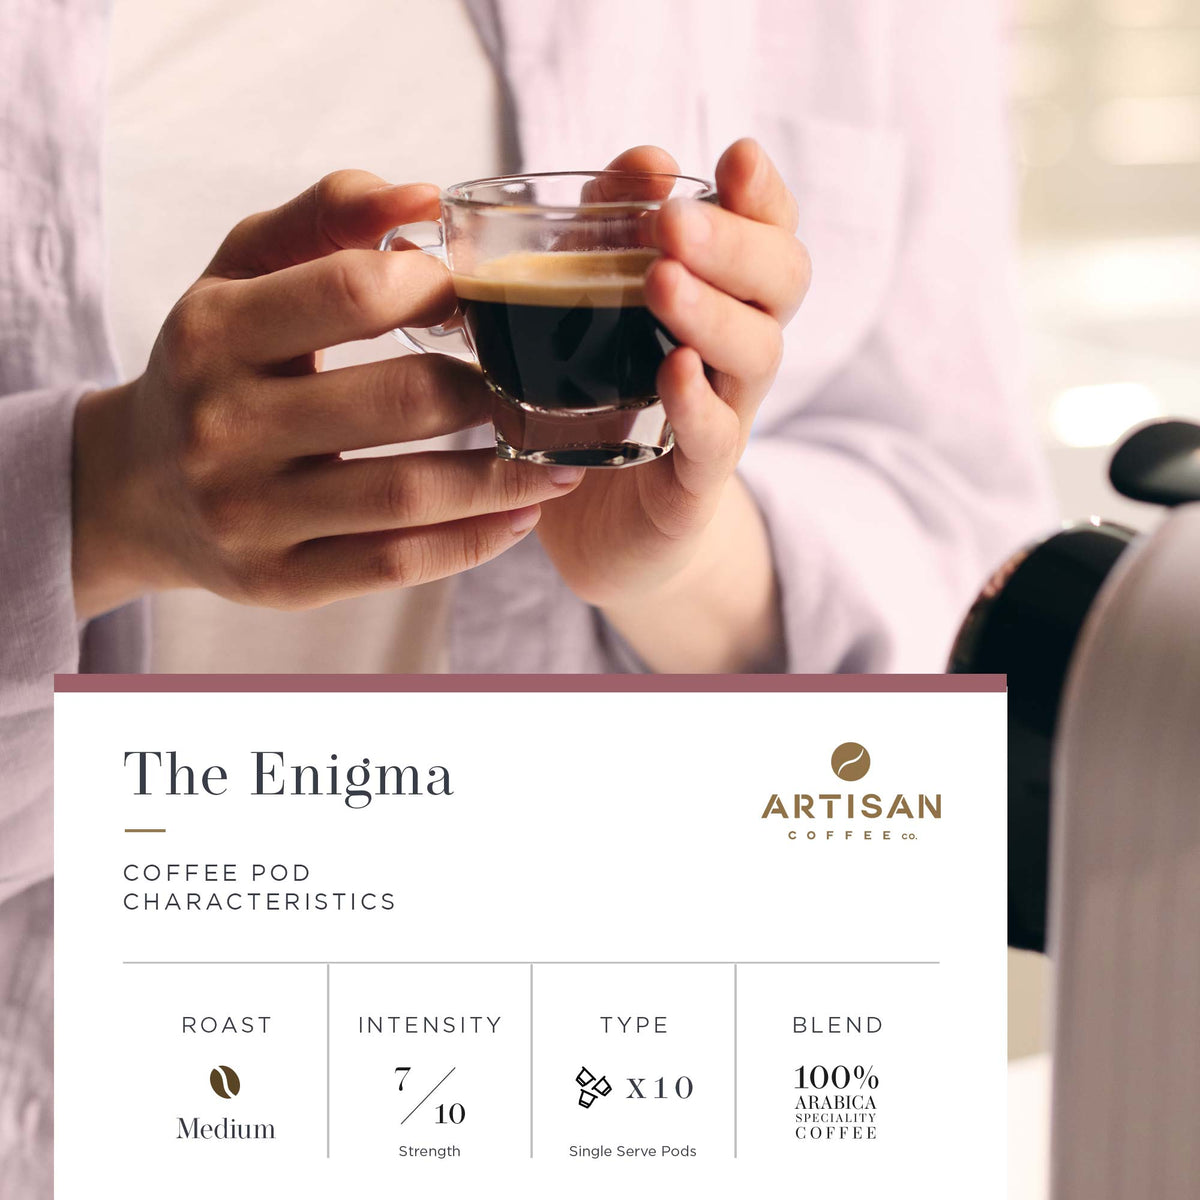 Artisan Coffee Co The Enigma Pods Infographic Characteristics